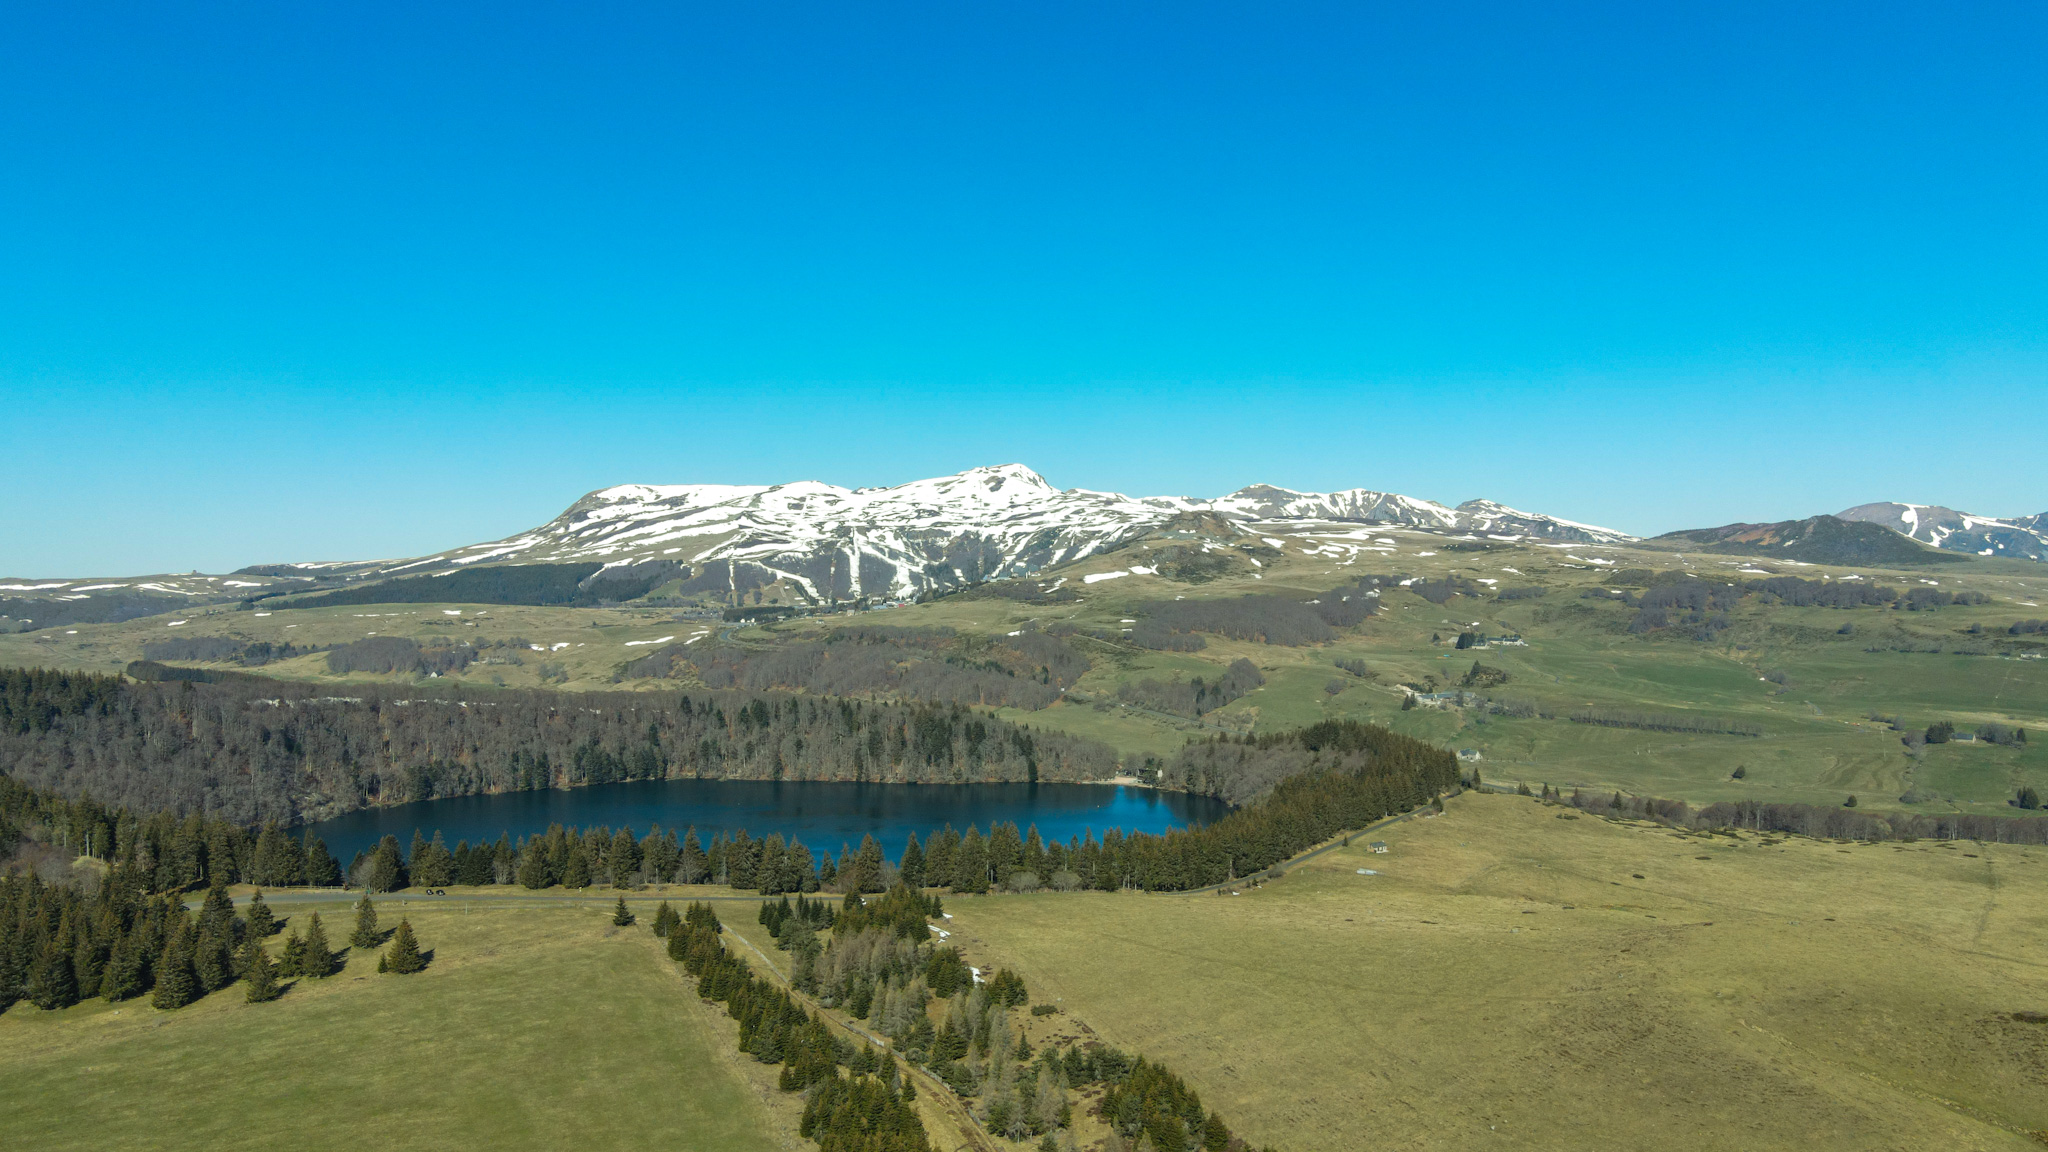 Lac Pavin and the last snow on the Massif du Sancy